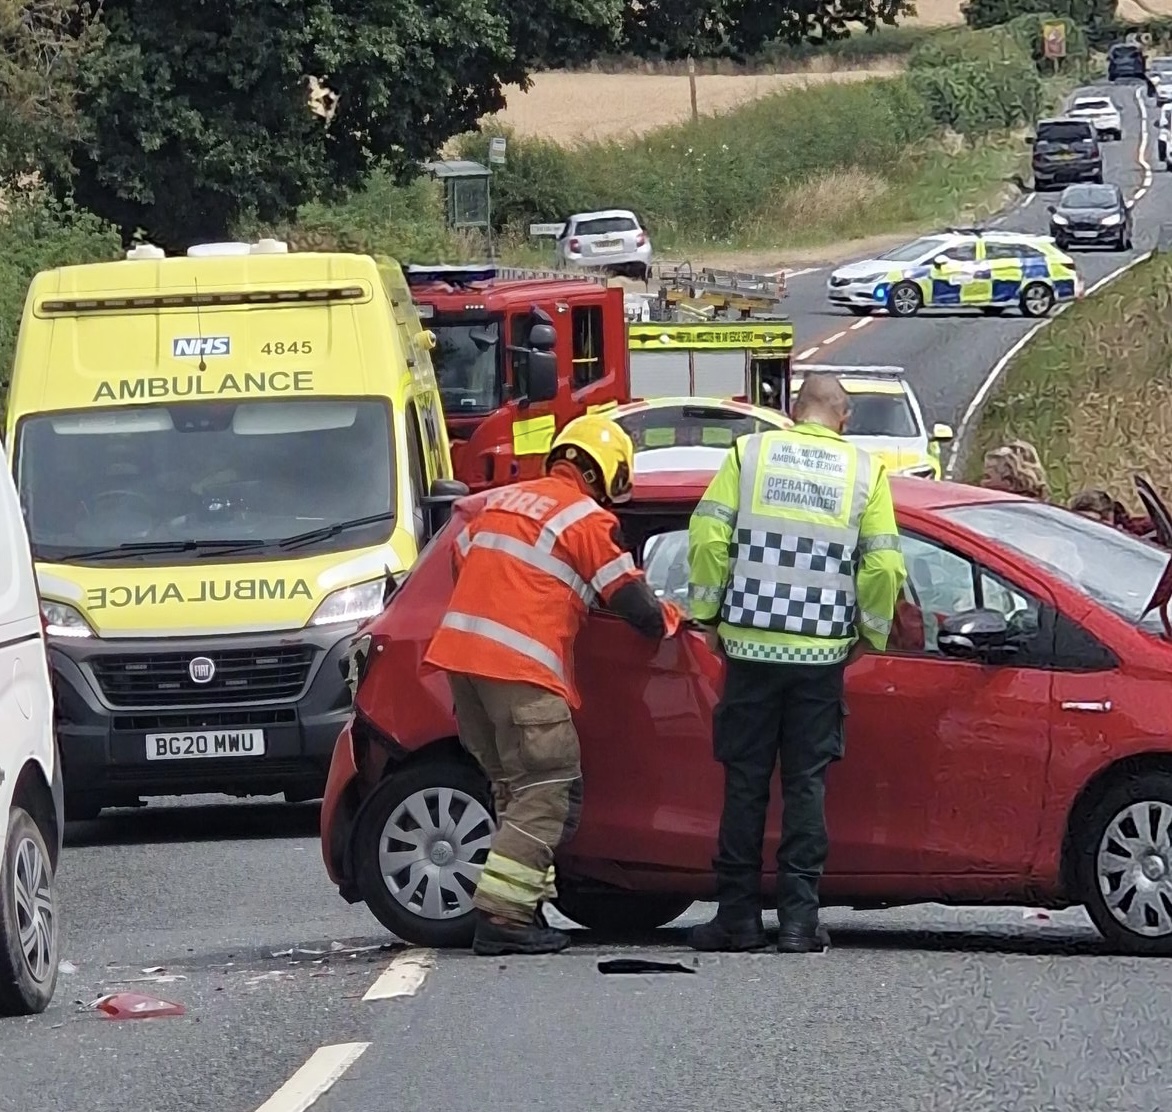 NEWS | Emergency services responding to a collision near Hereford this afternoon